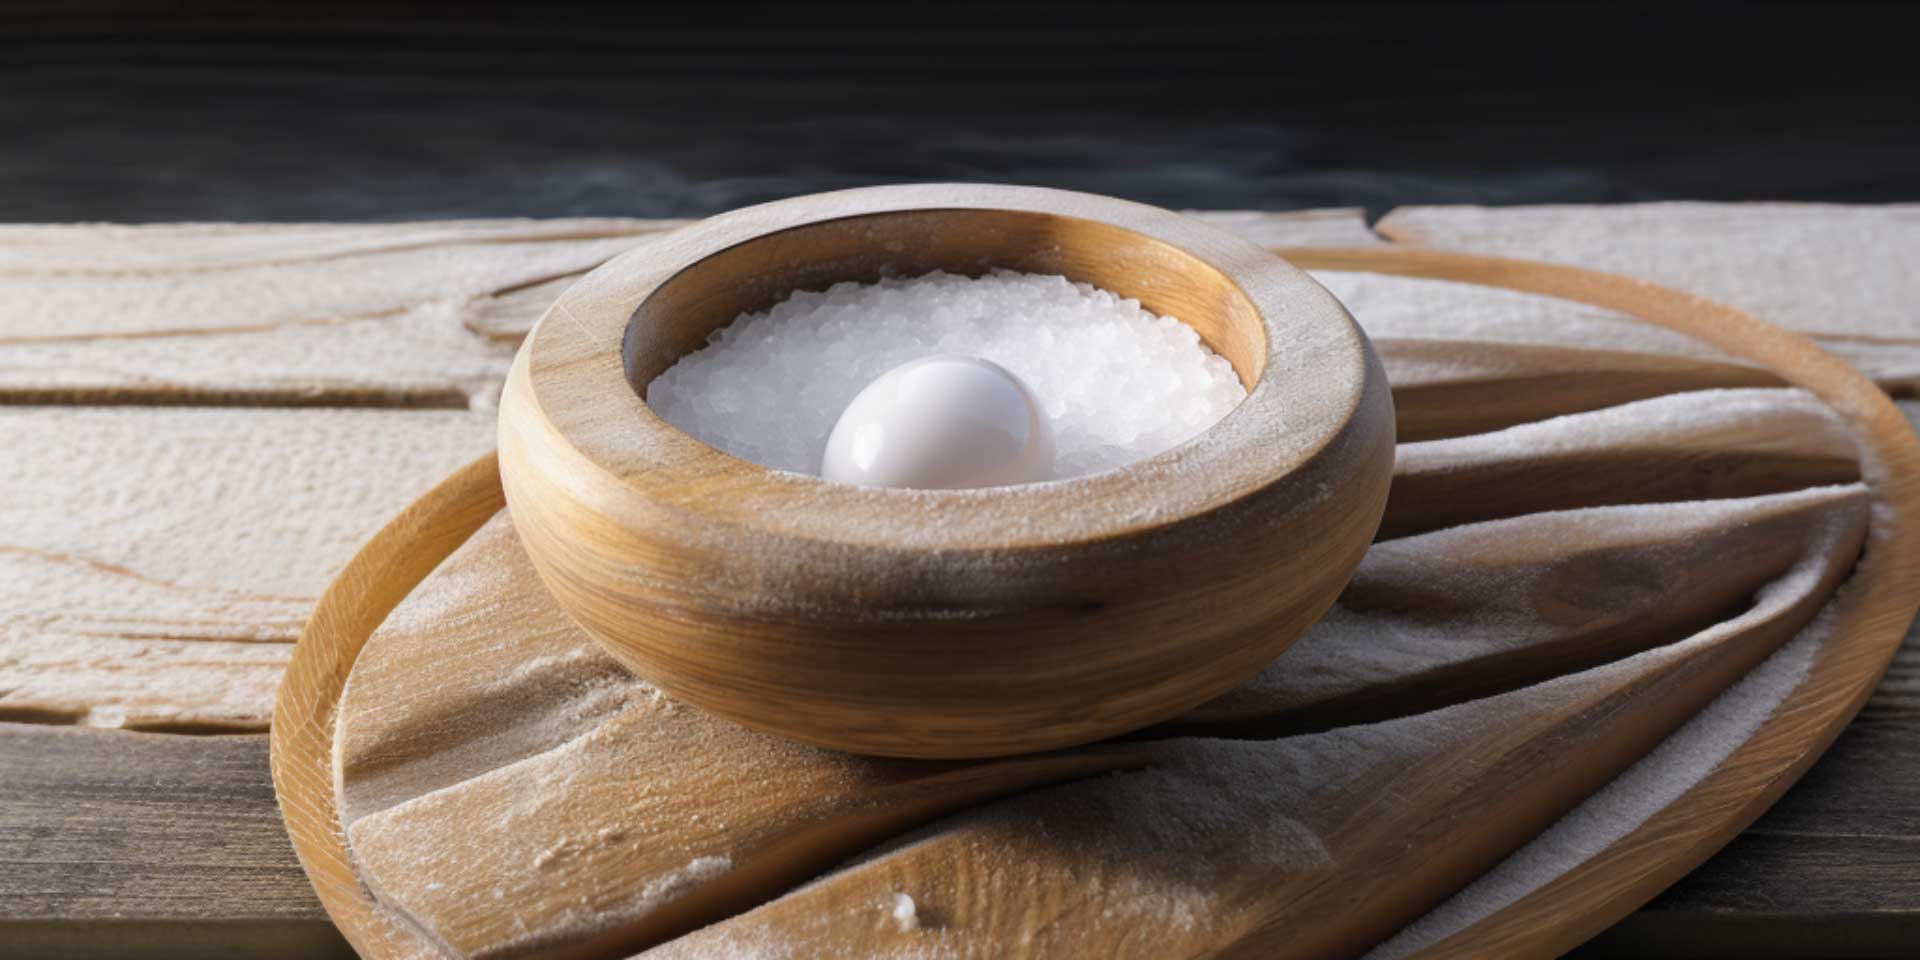 An egg inside of a bowl of salt on a wooden table.